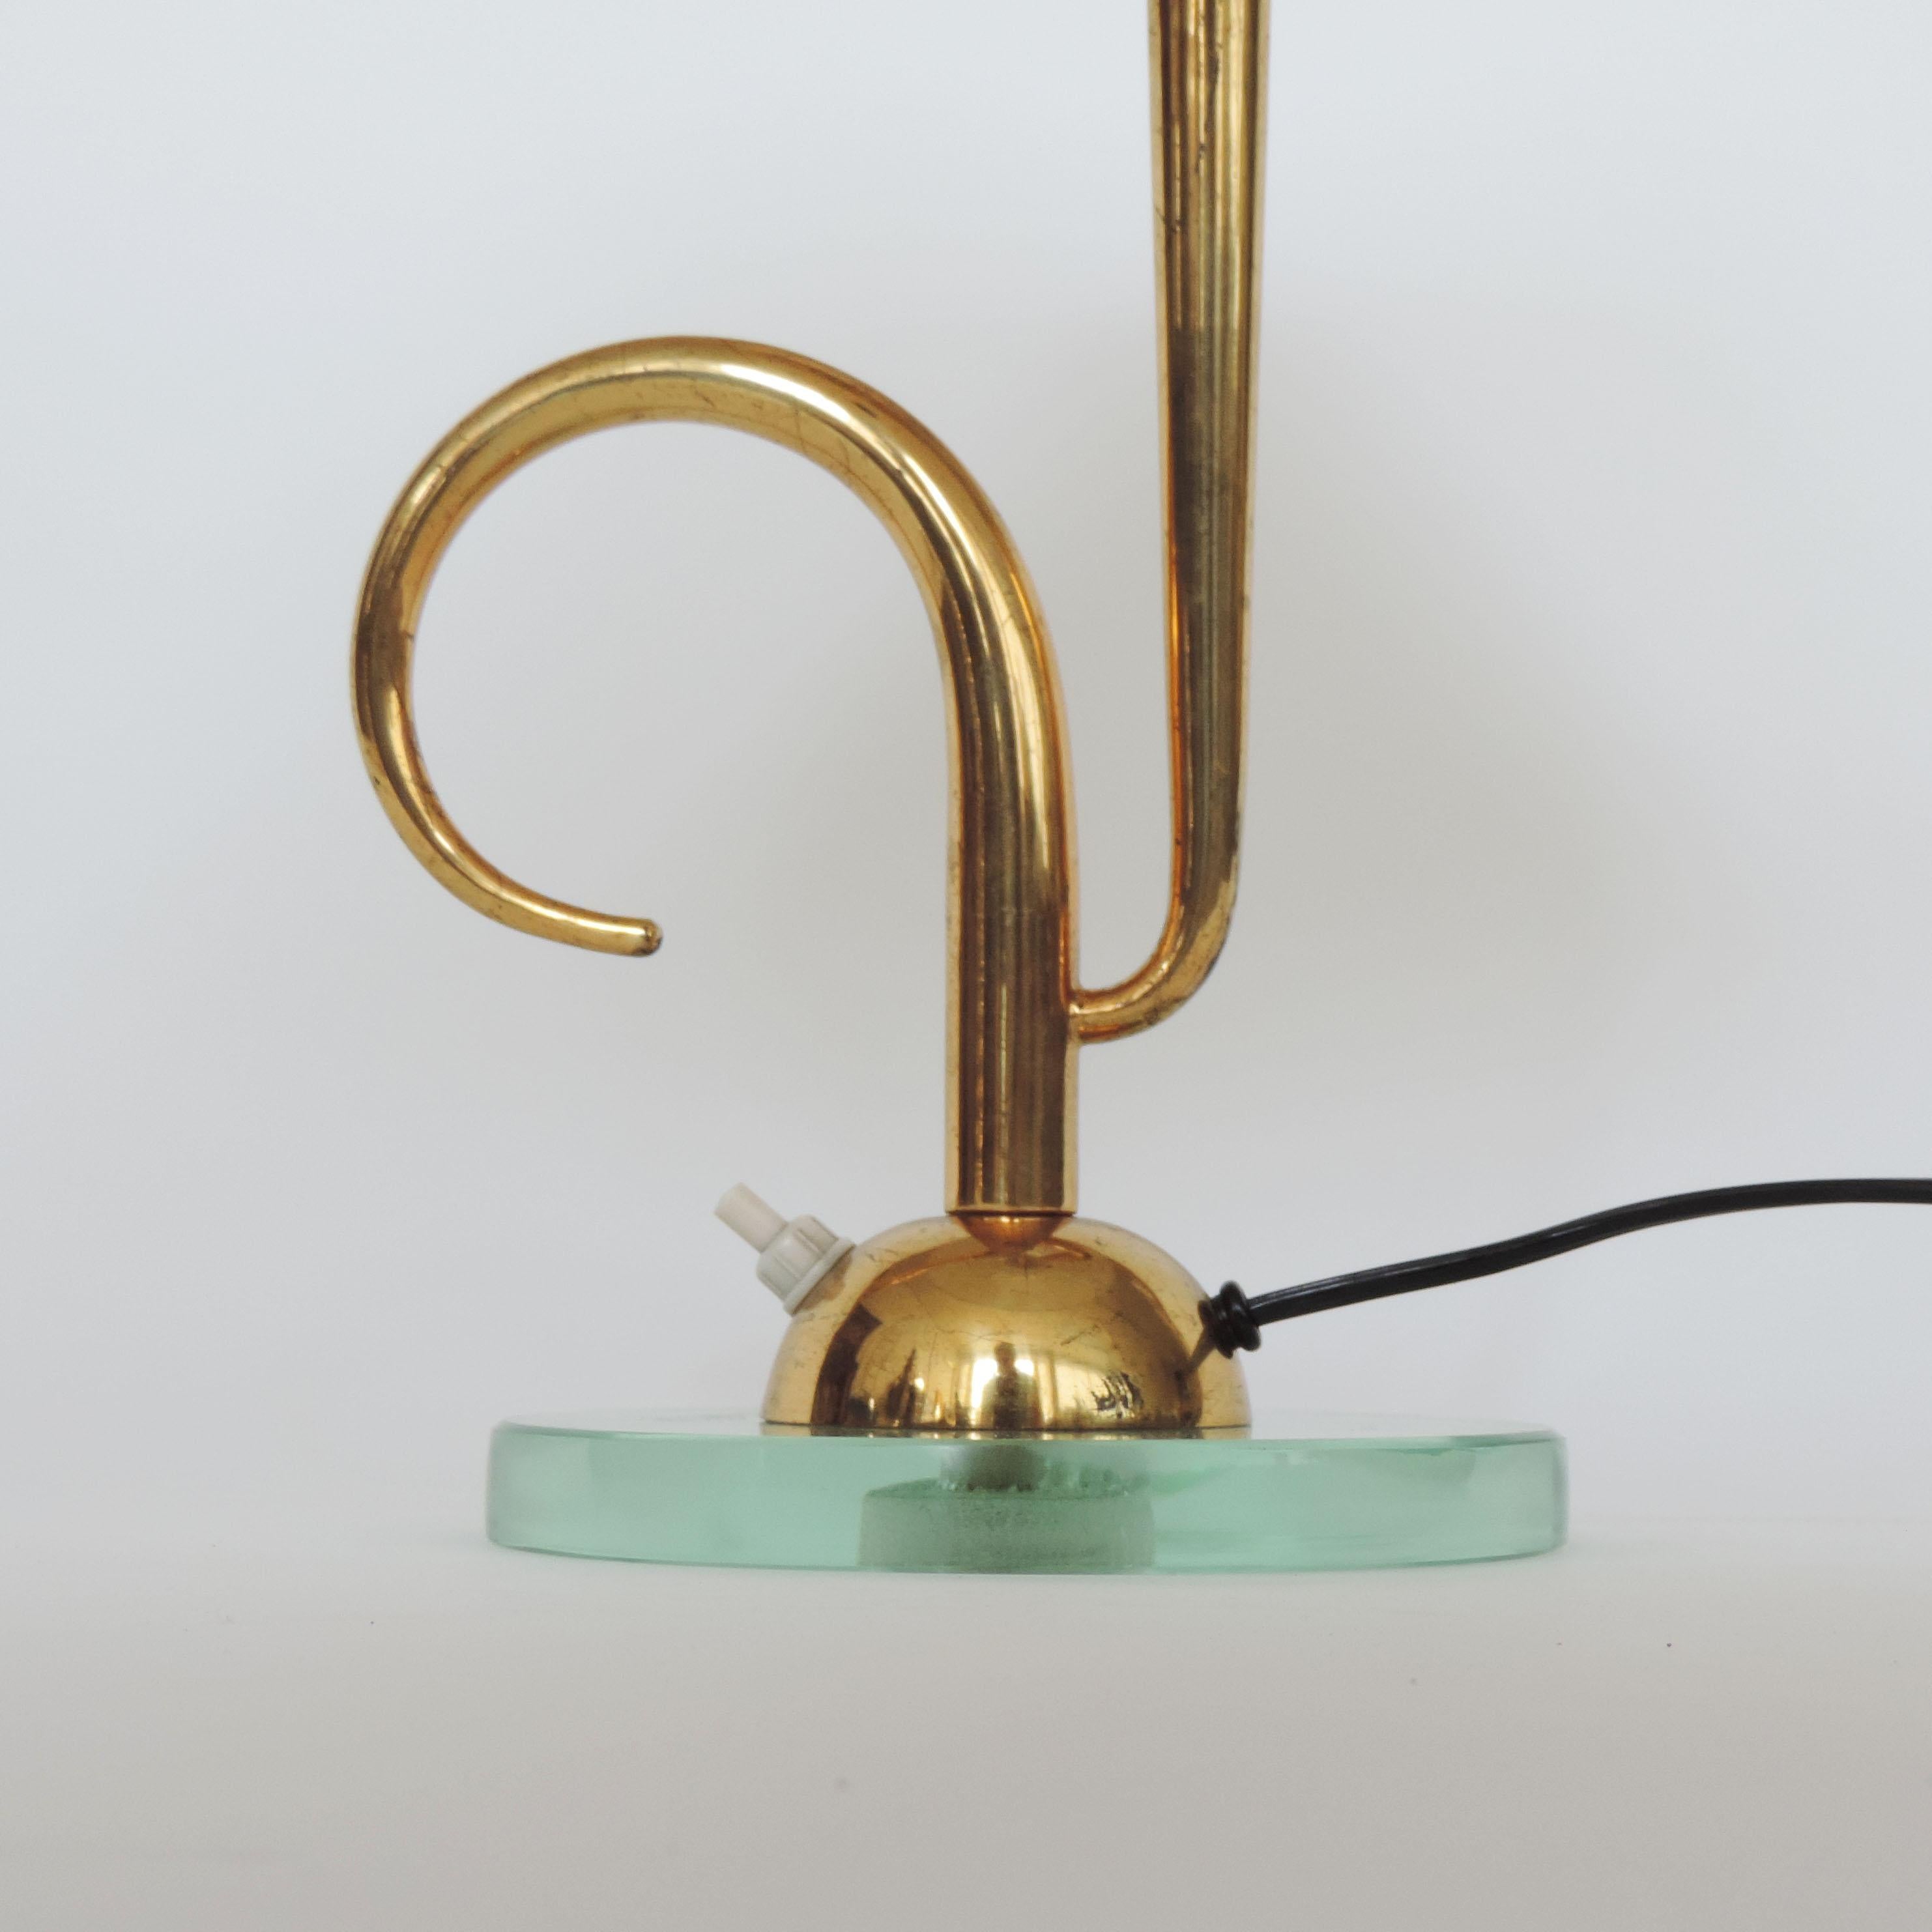 Italian 1940s table lamp in glass and brass.
Height measurement is without a lampshade.